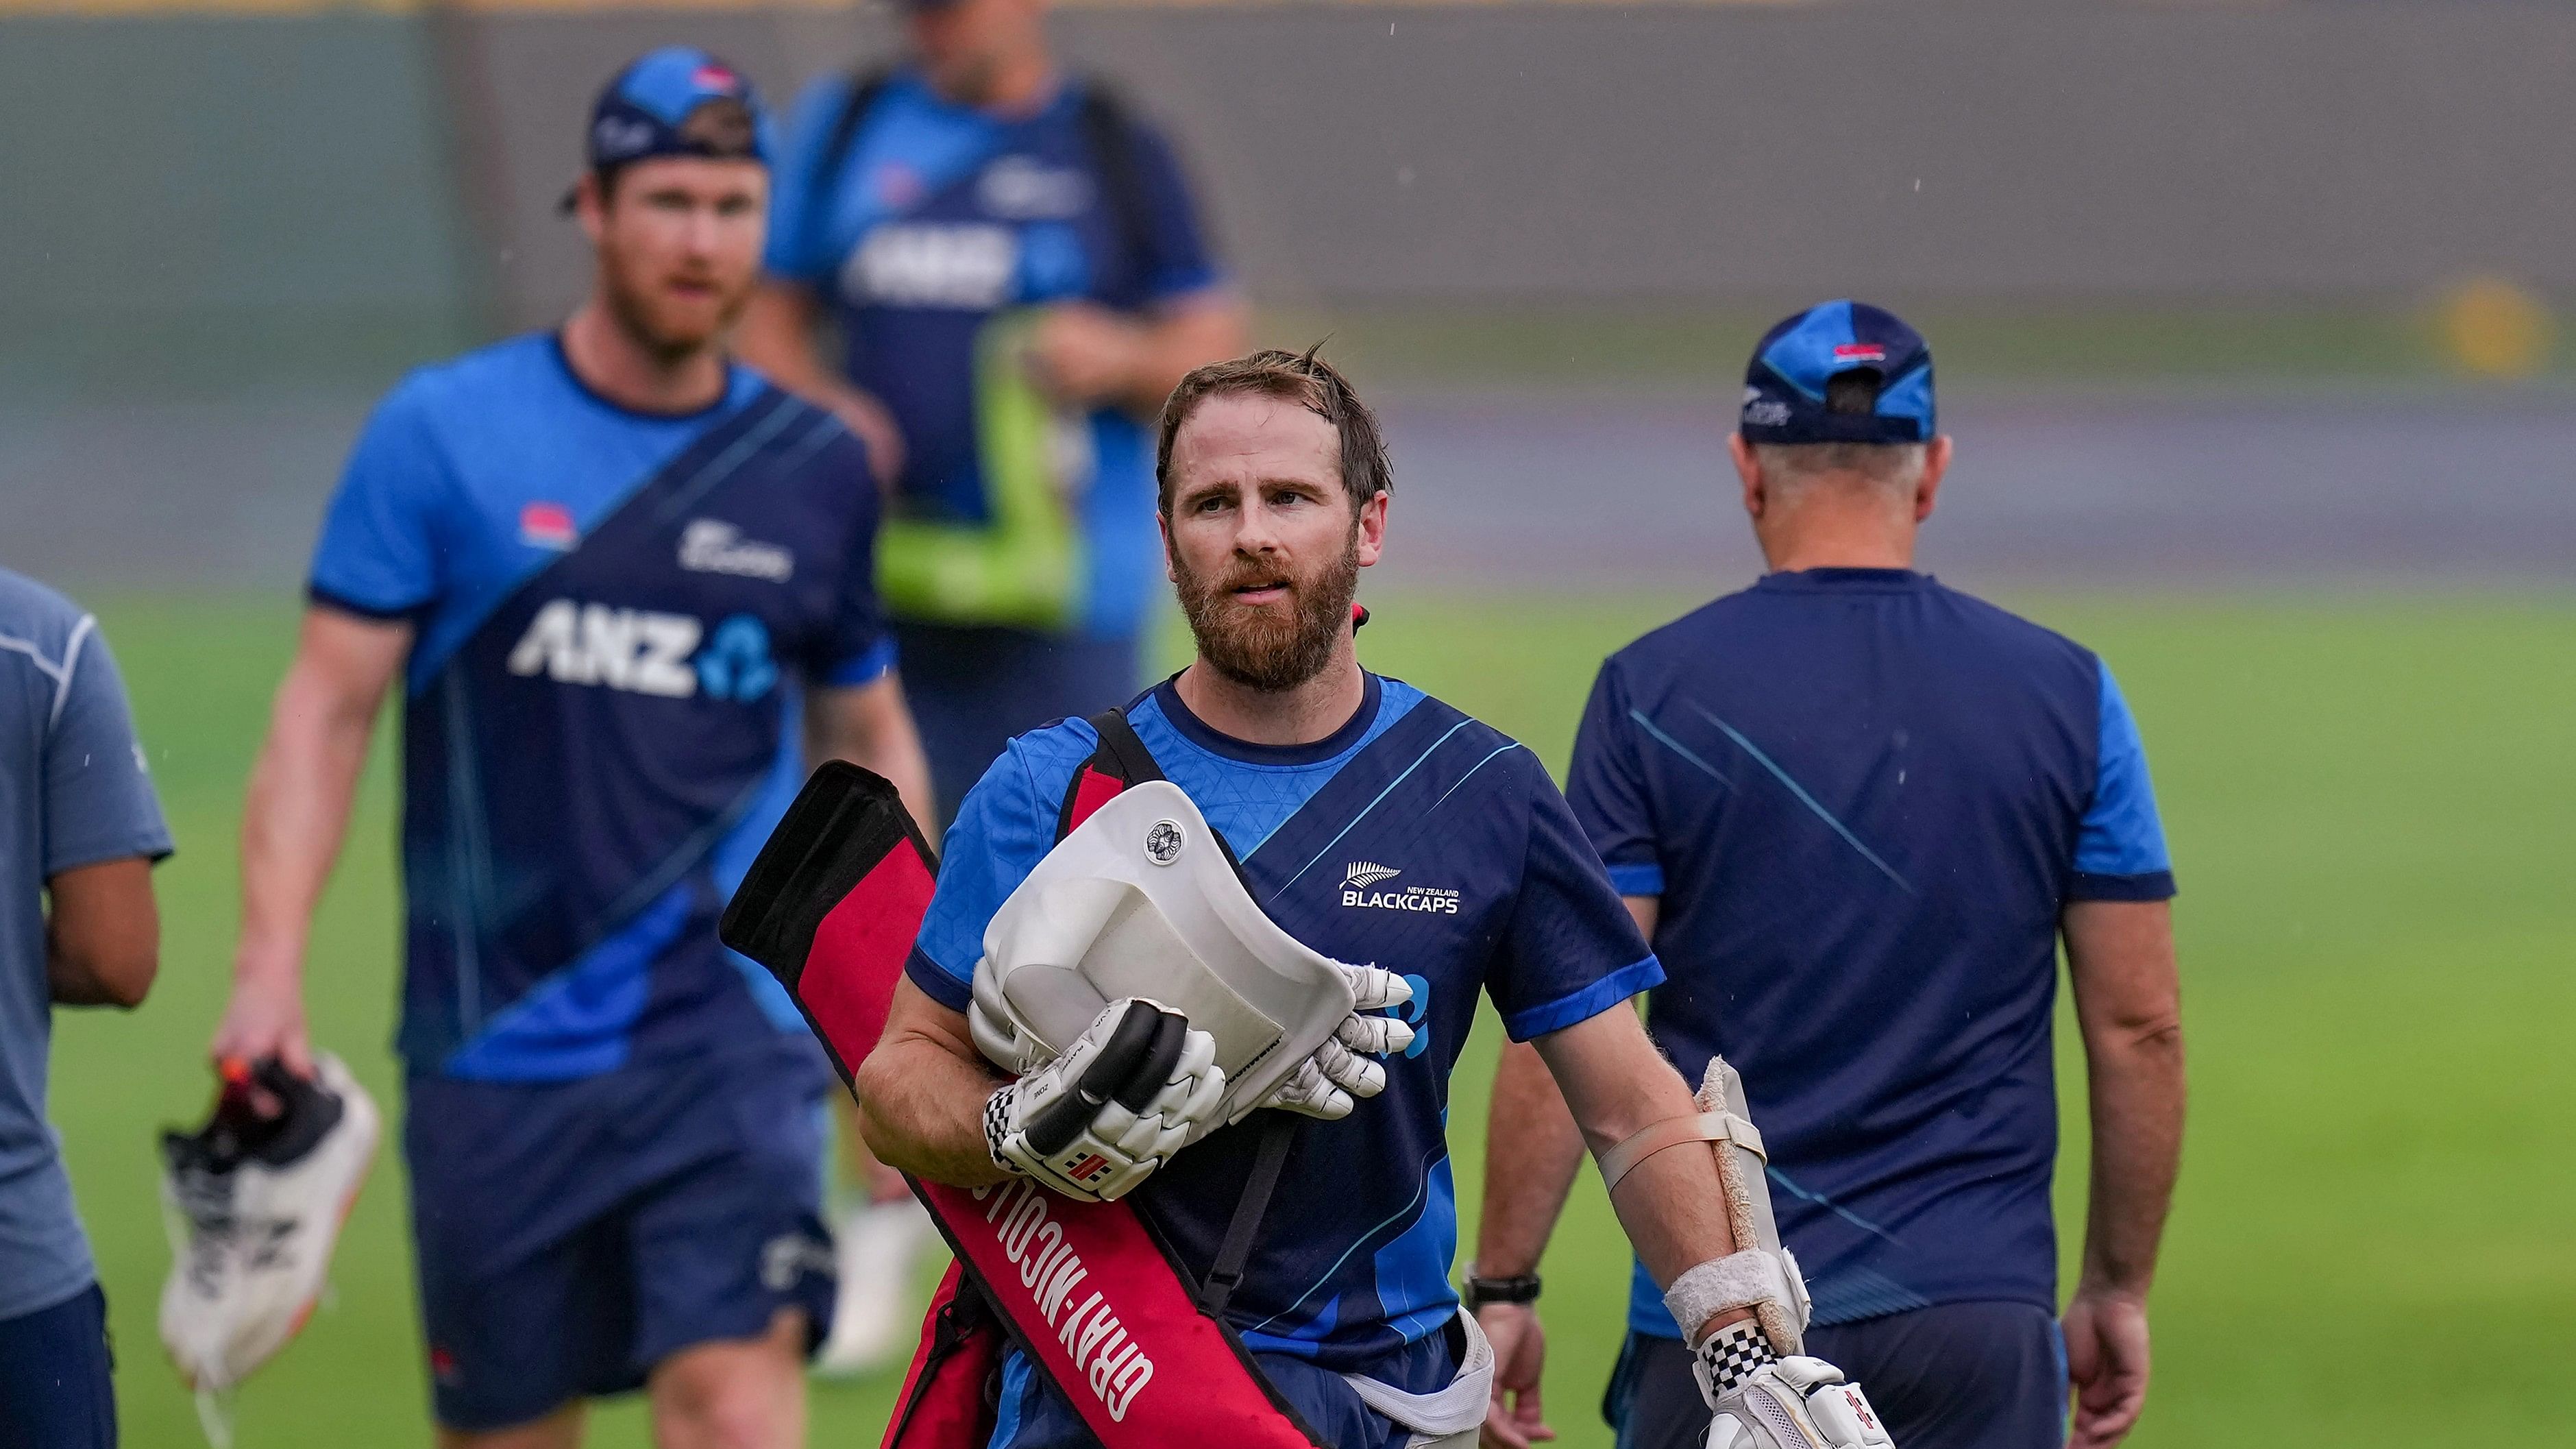 <div class="paragraphs"><p>Bengaluru: New Zealand's captain Kane Williamson during a practice session ahead of the ICC Men's Cricket World Cup 2023 match between New Zealand and Sri Lanka at M. Chinnaswamy Stadium, in Bengaluru, Tuesday, Nov. 7, 2023.</p></div>